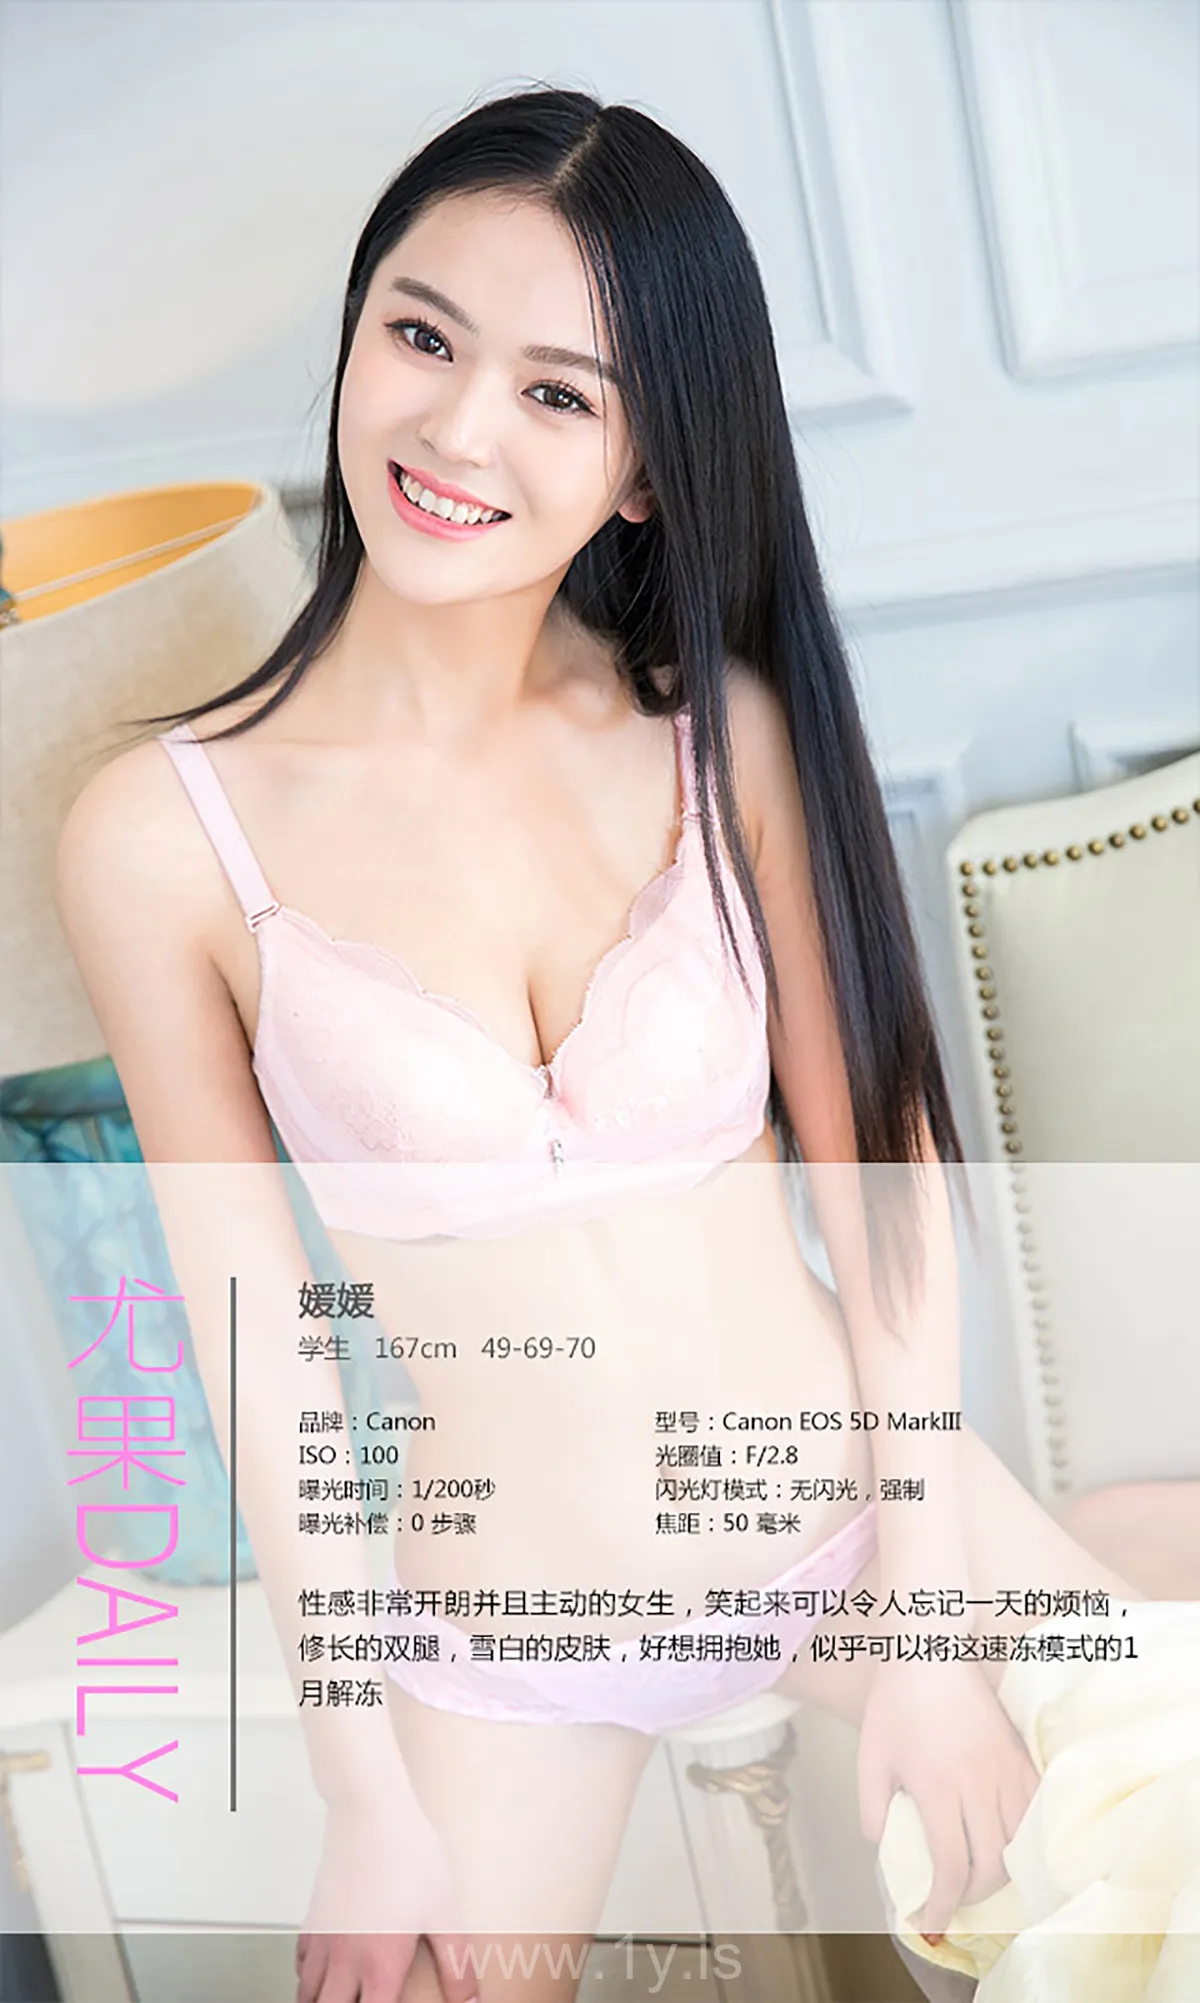 UGIRLS NO.251 Exquisite & Good-looking Chinese Chick 媛媛欠你的宠爱